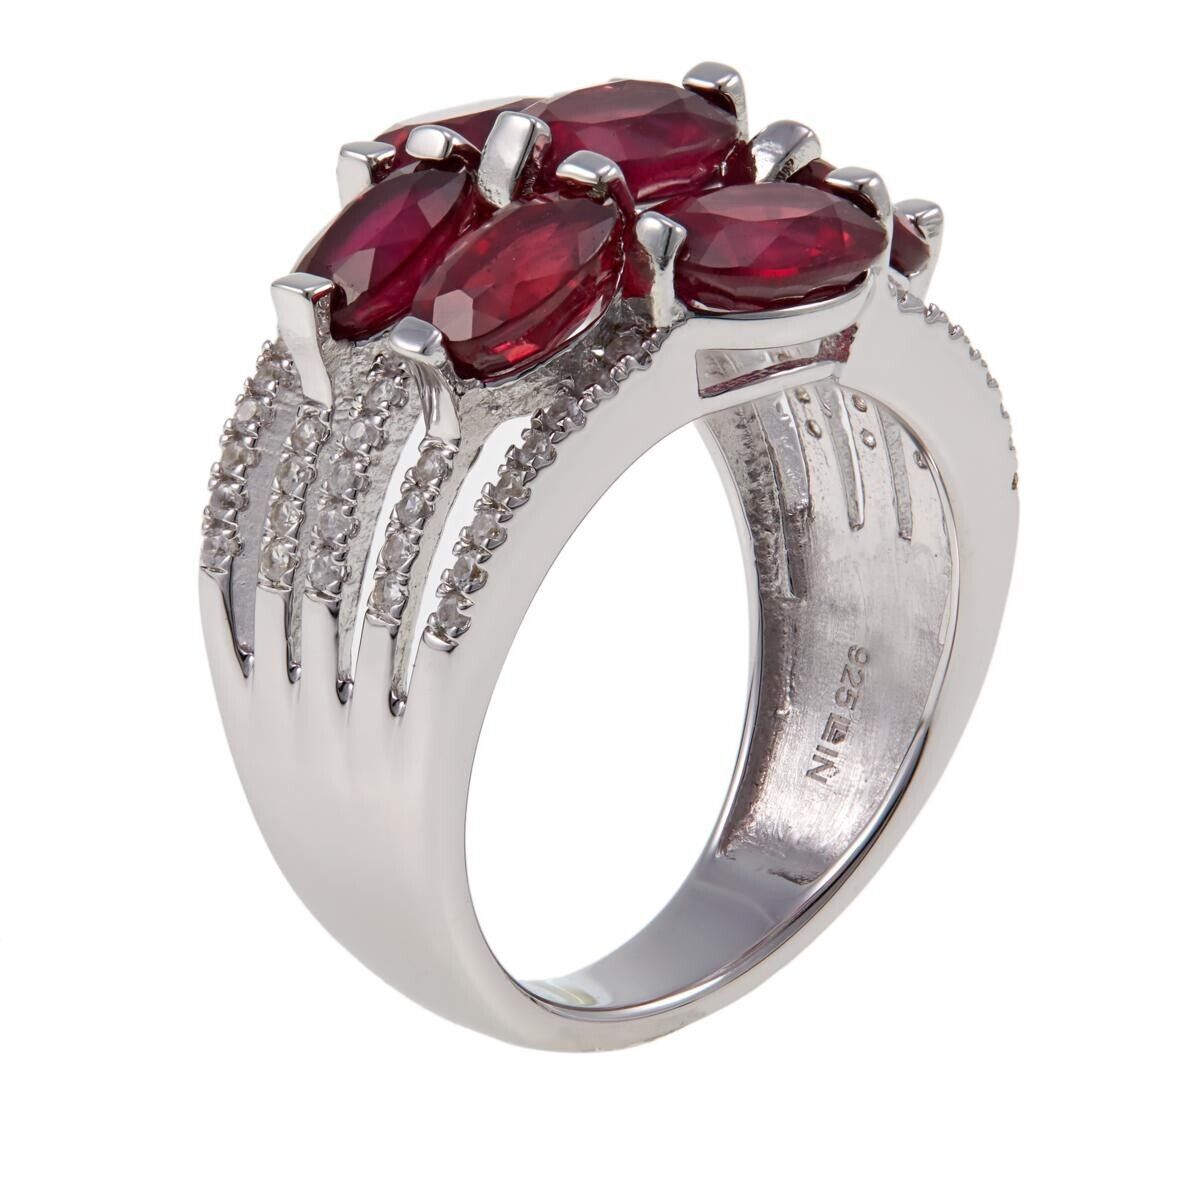 Colleen Lopez Oval Ruby and White Zircon 7-Stone Ring, Size 7